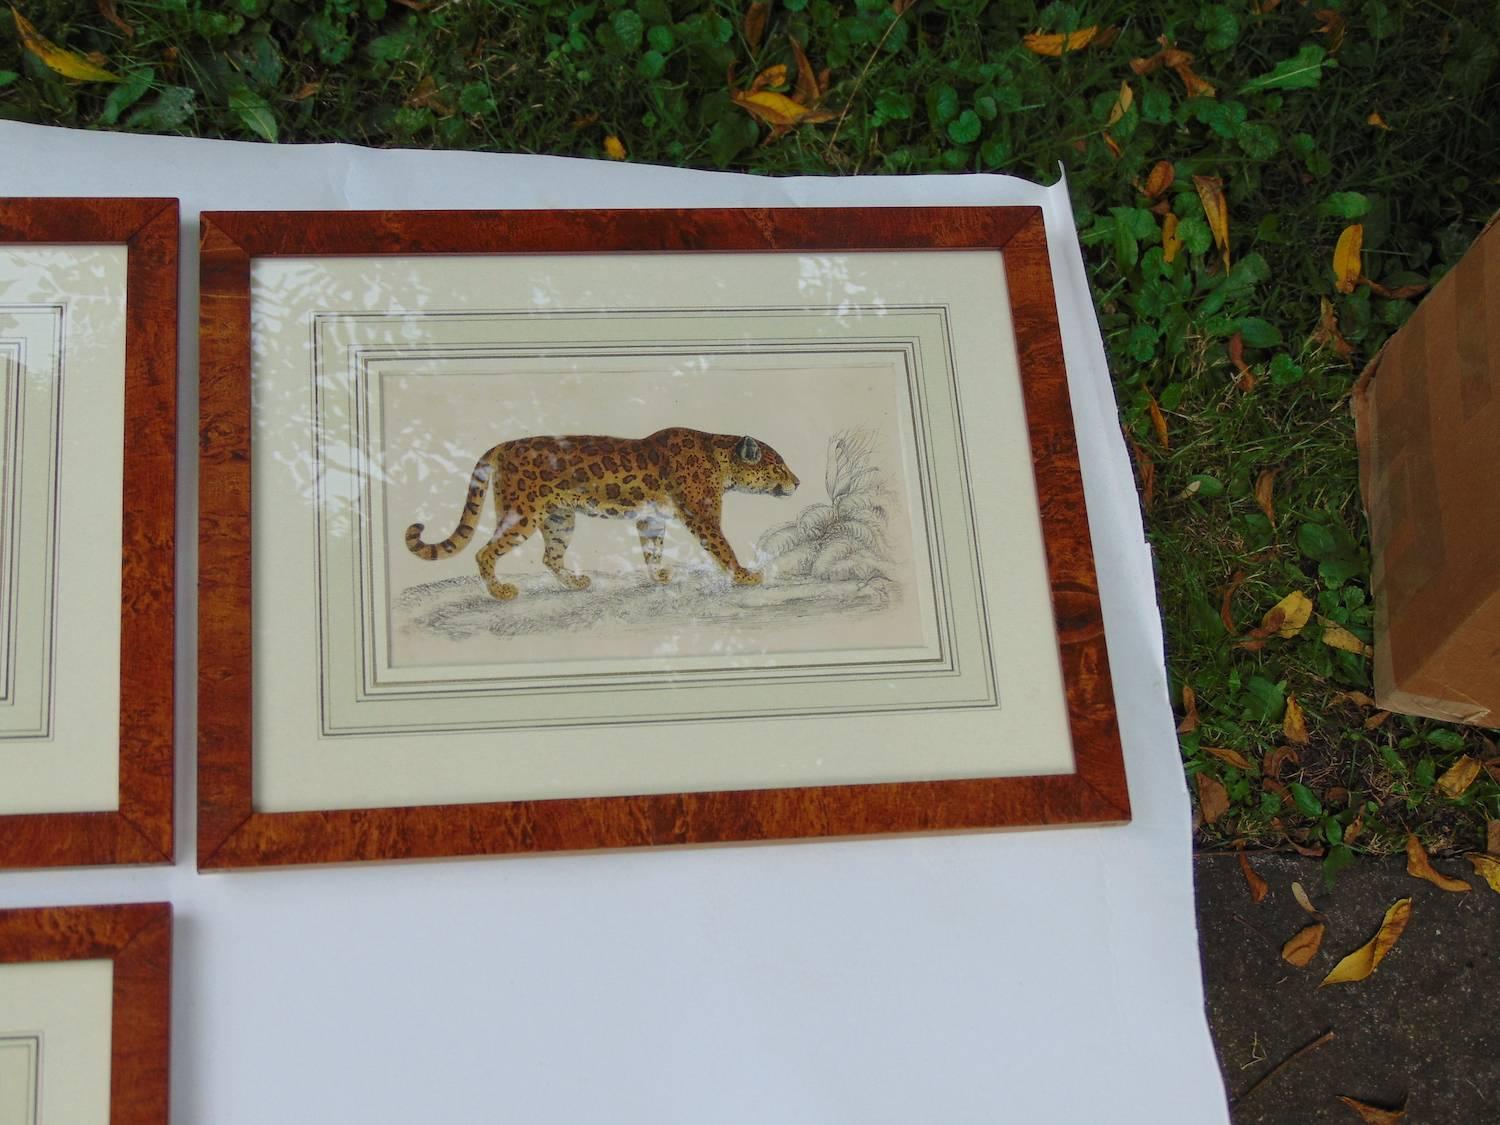 Set of four beautifully matted and framed, circa 1800 engravings of lions and tigers. Hand colored and published by Kearsley Fleet Street in 1800 and drawn by artist Heath, probably William. Pale blue/green mattes and attractive wood frames. Sight